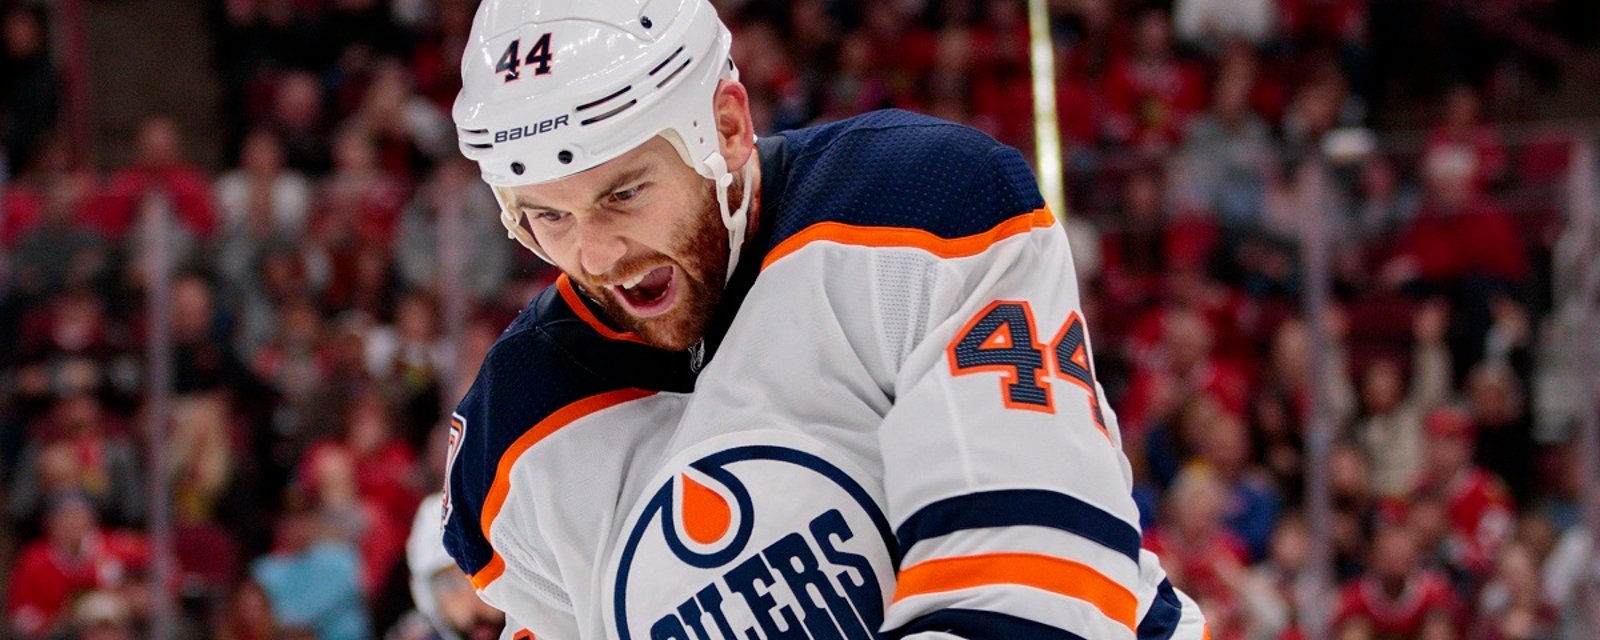 Oilers forced to make multiple lineup changes due to injuries &amp; more.